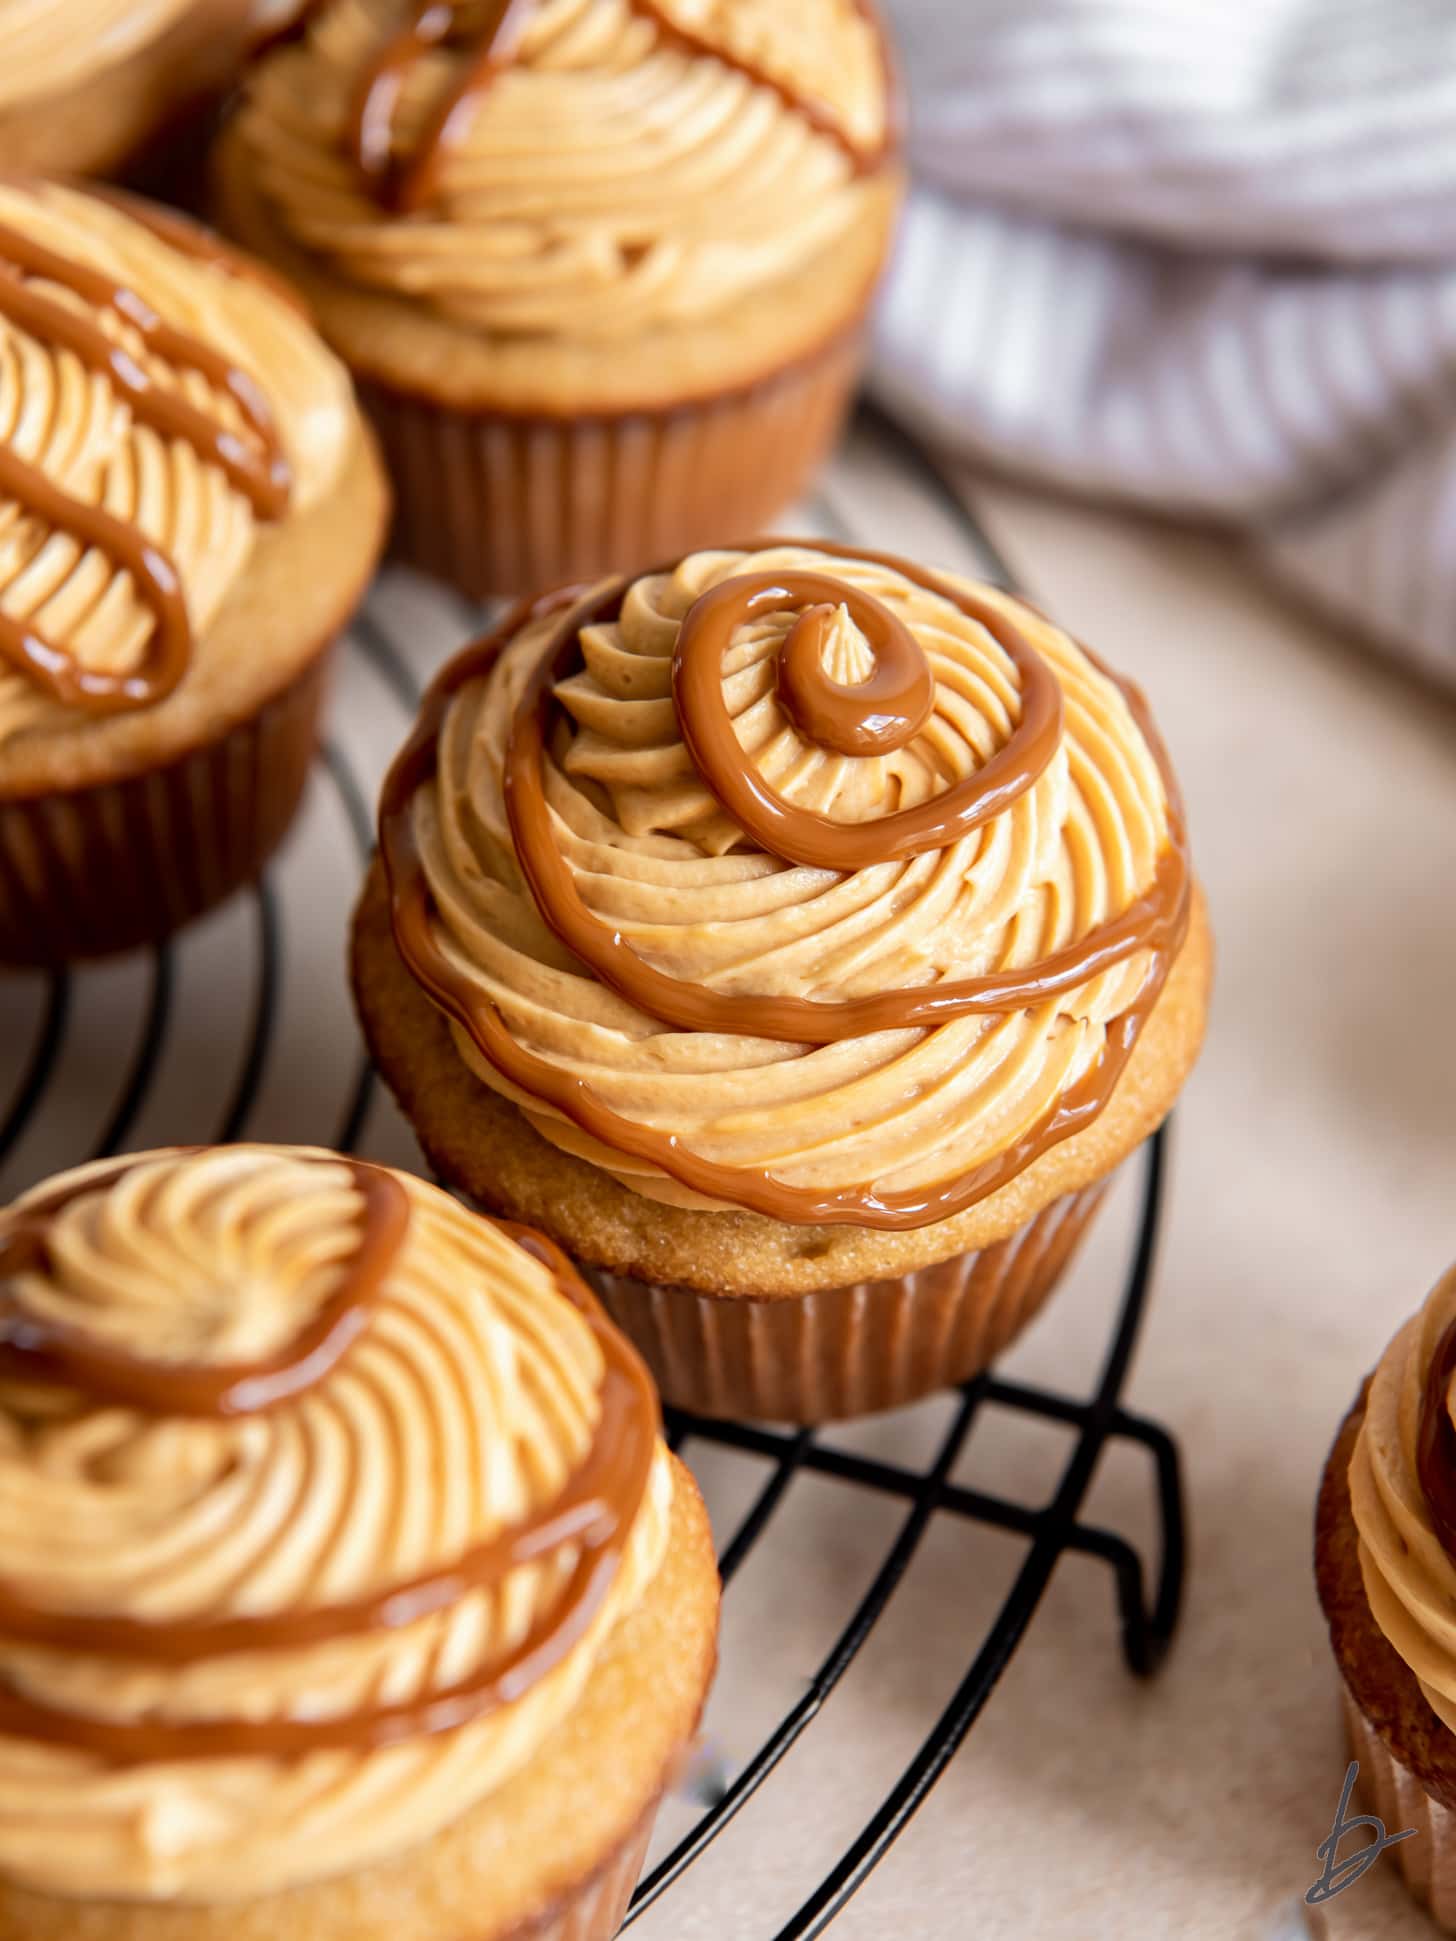 dulce de leche cupcake with frosting and swirl of dulce de leche on top.